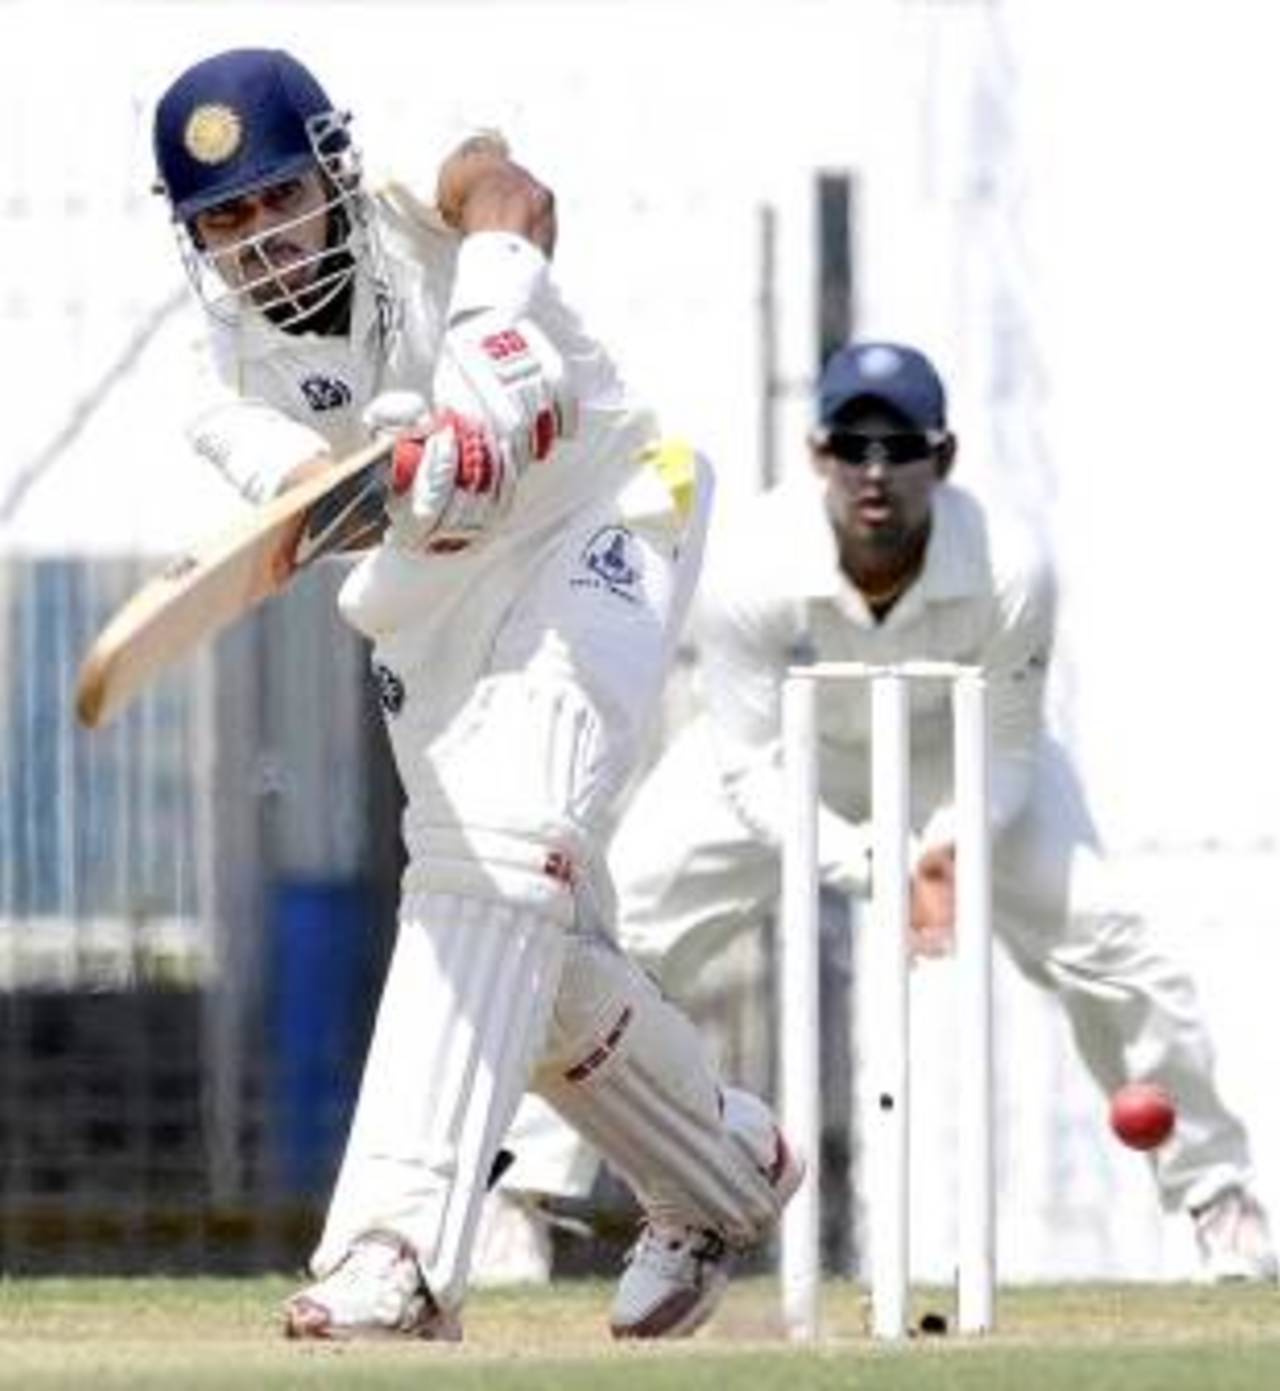 S Badrinath turns one away, South Zone v Central Zone, Duleep Trophy 2011-12 semi-final, 4th day, February 7, 2012